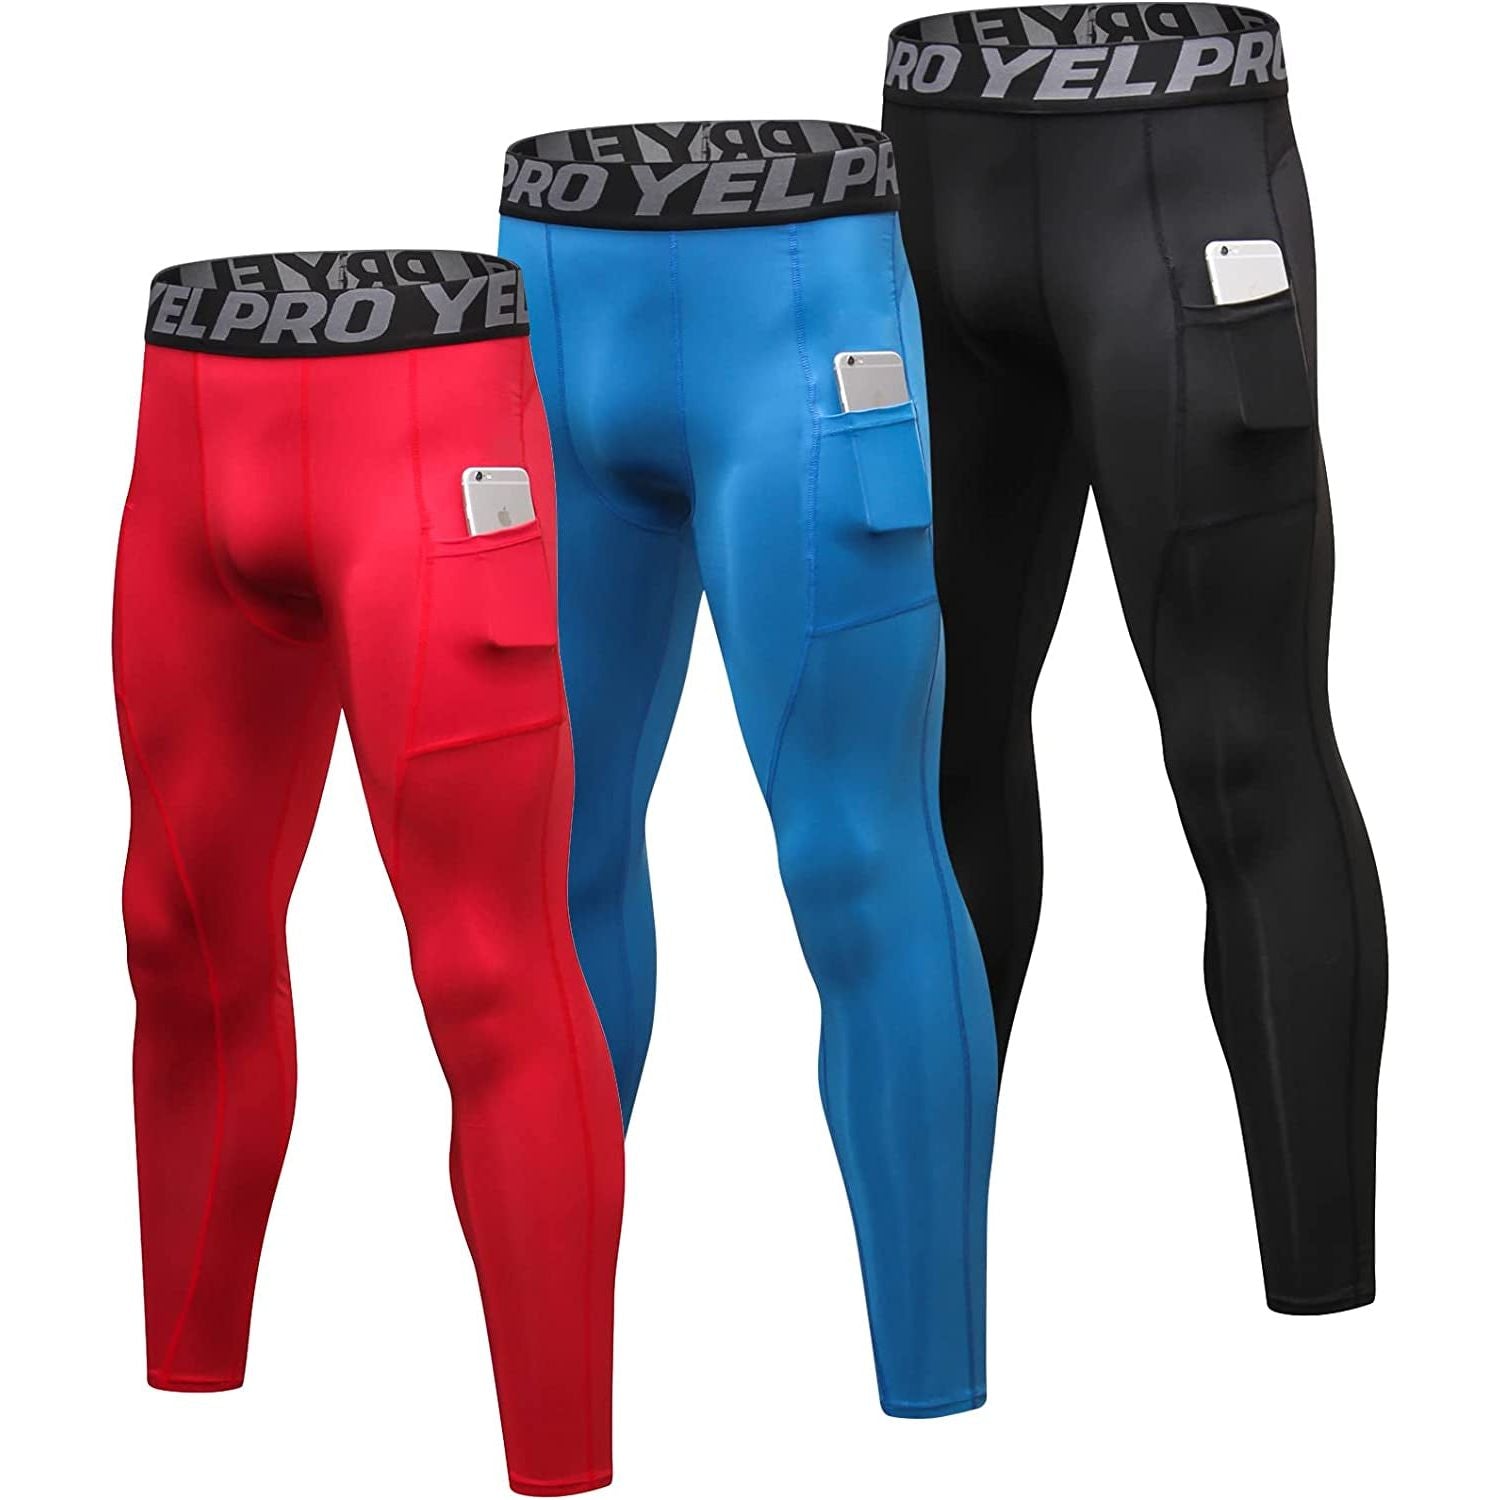 Compression Pants Men 3 Pack, Dry Fit Workout Gym Leggings Mens, Cooling Sports Tights for Running Basketball Football